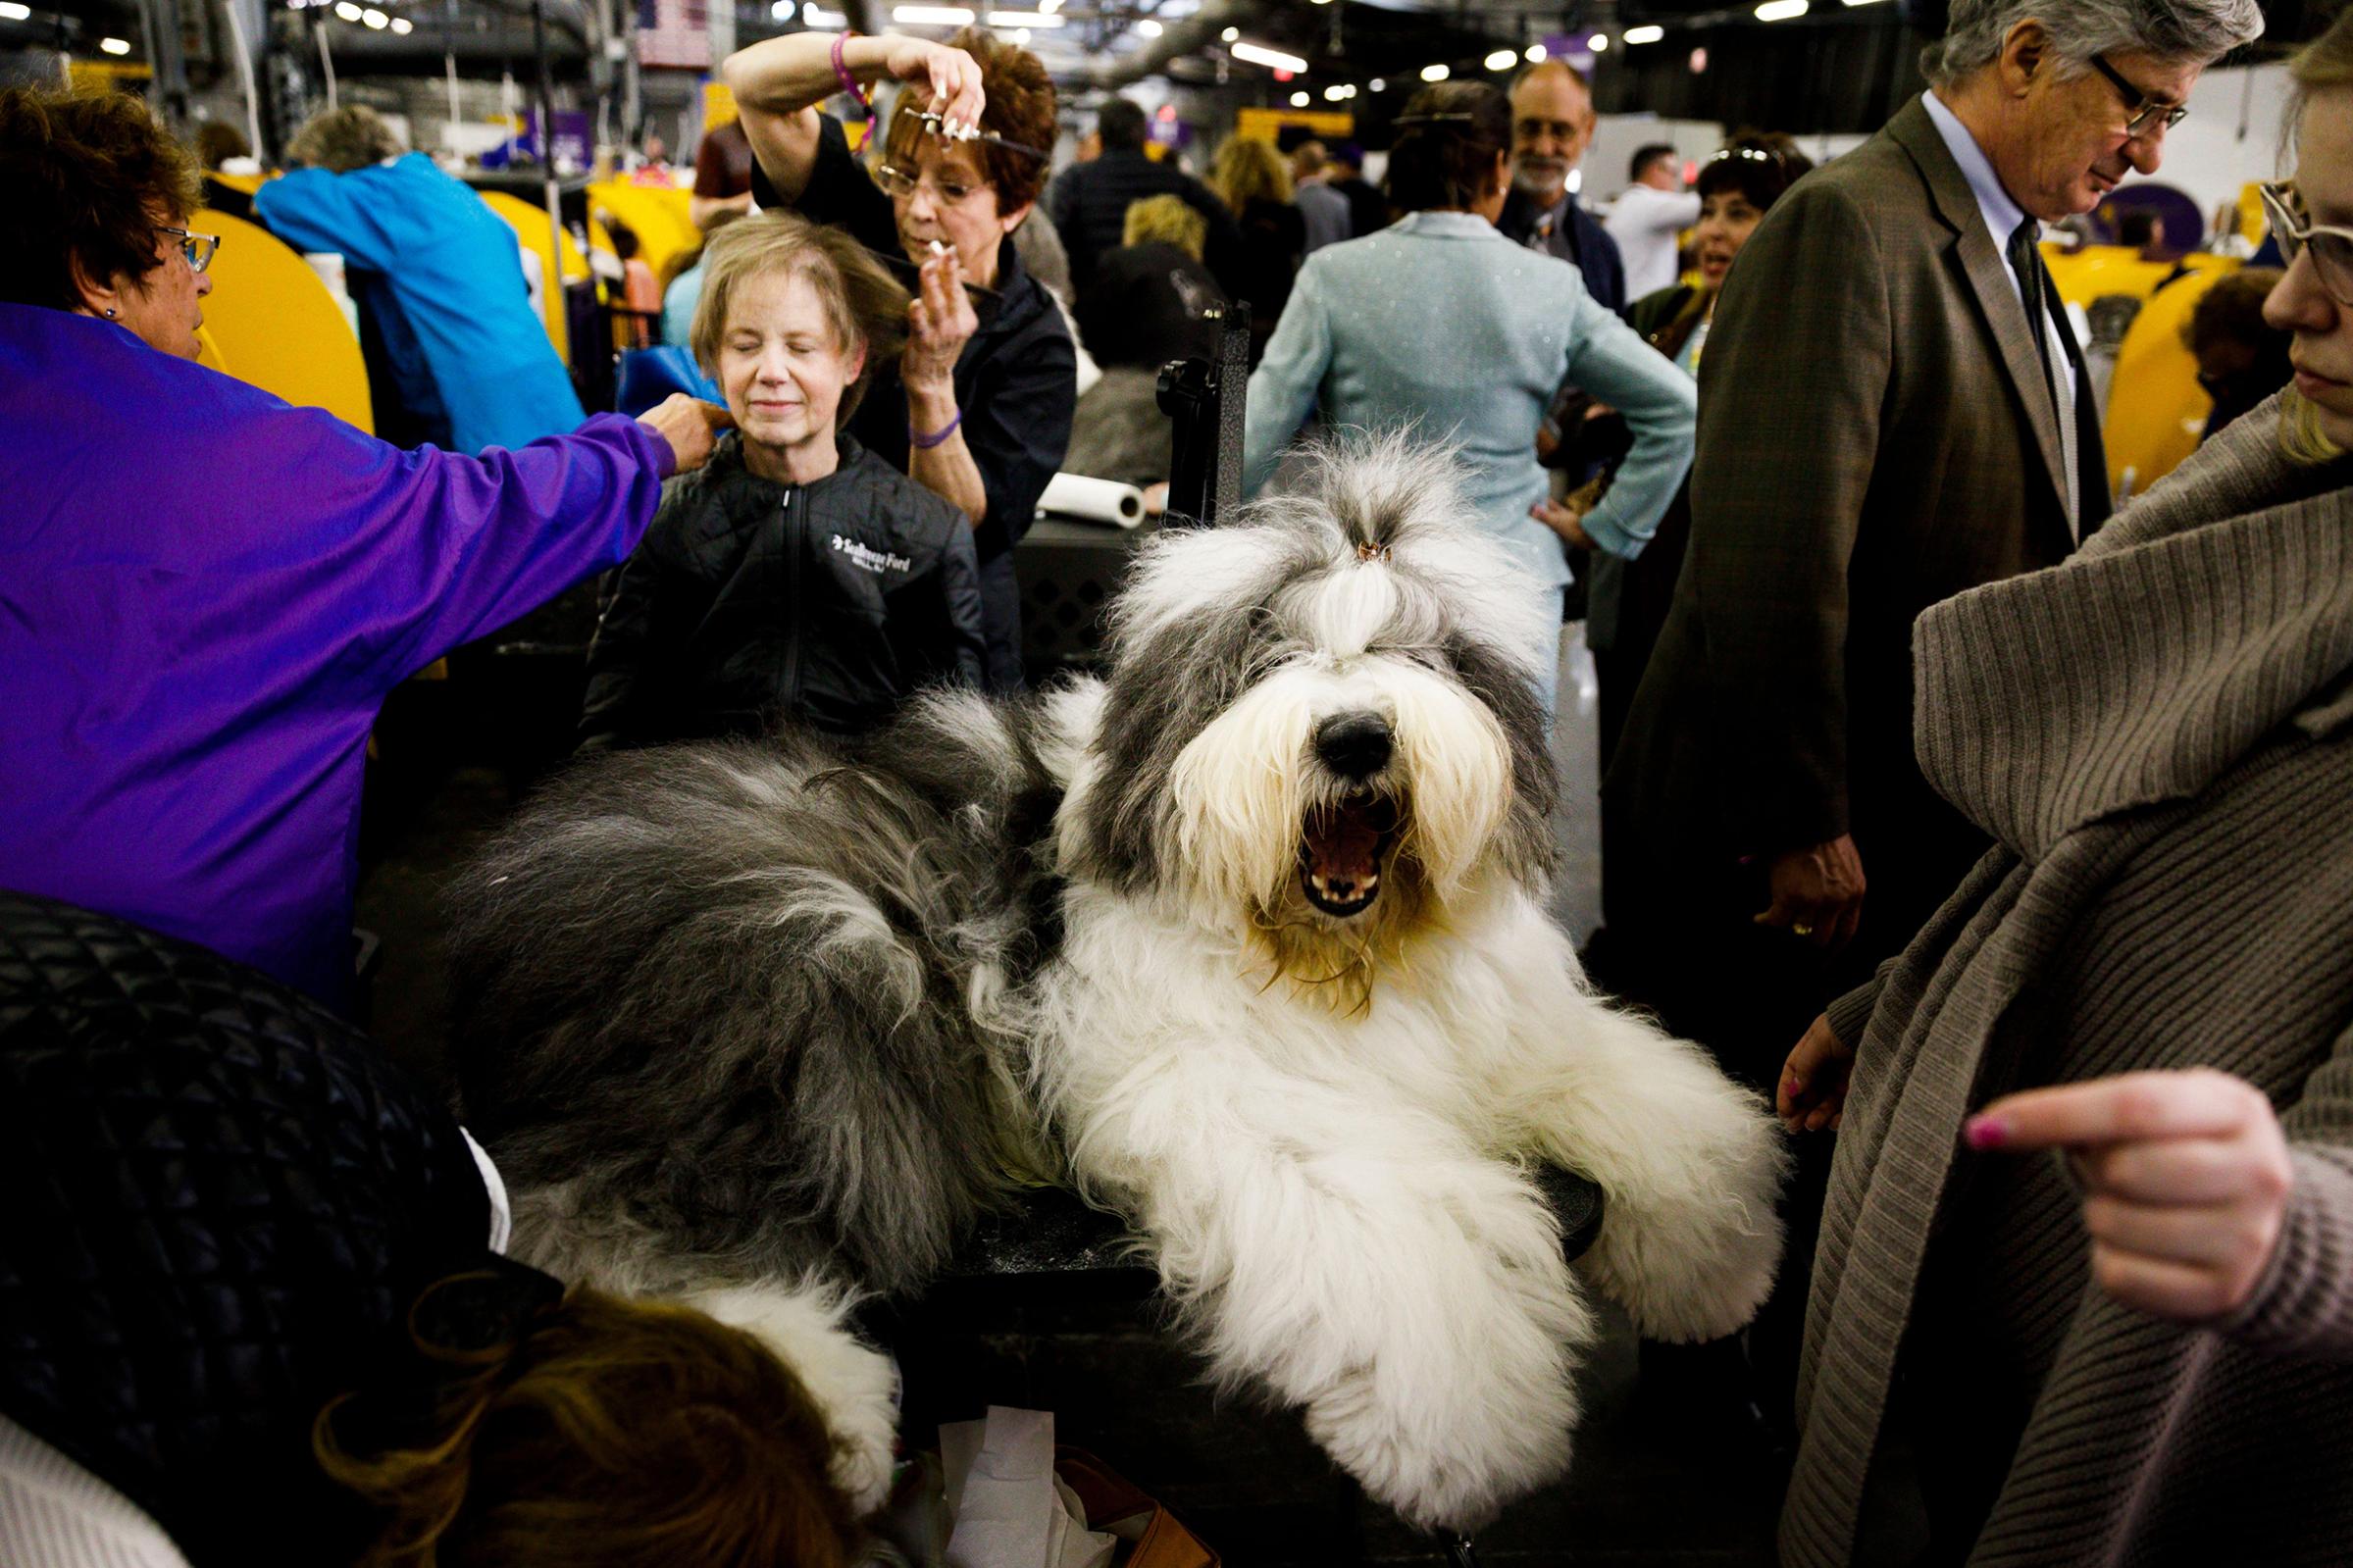 An Old English Sheepdog named 'Champion Haystacks Montgomery Spartan General' is groomed for competition as a woman gets a hair cut in the background during the 2018 Westminster Kennel Club Dog Show in New York, on Feb. 12, 2018.